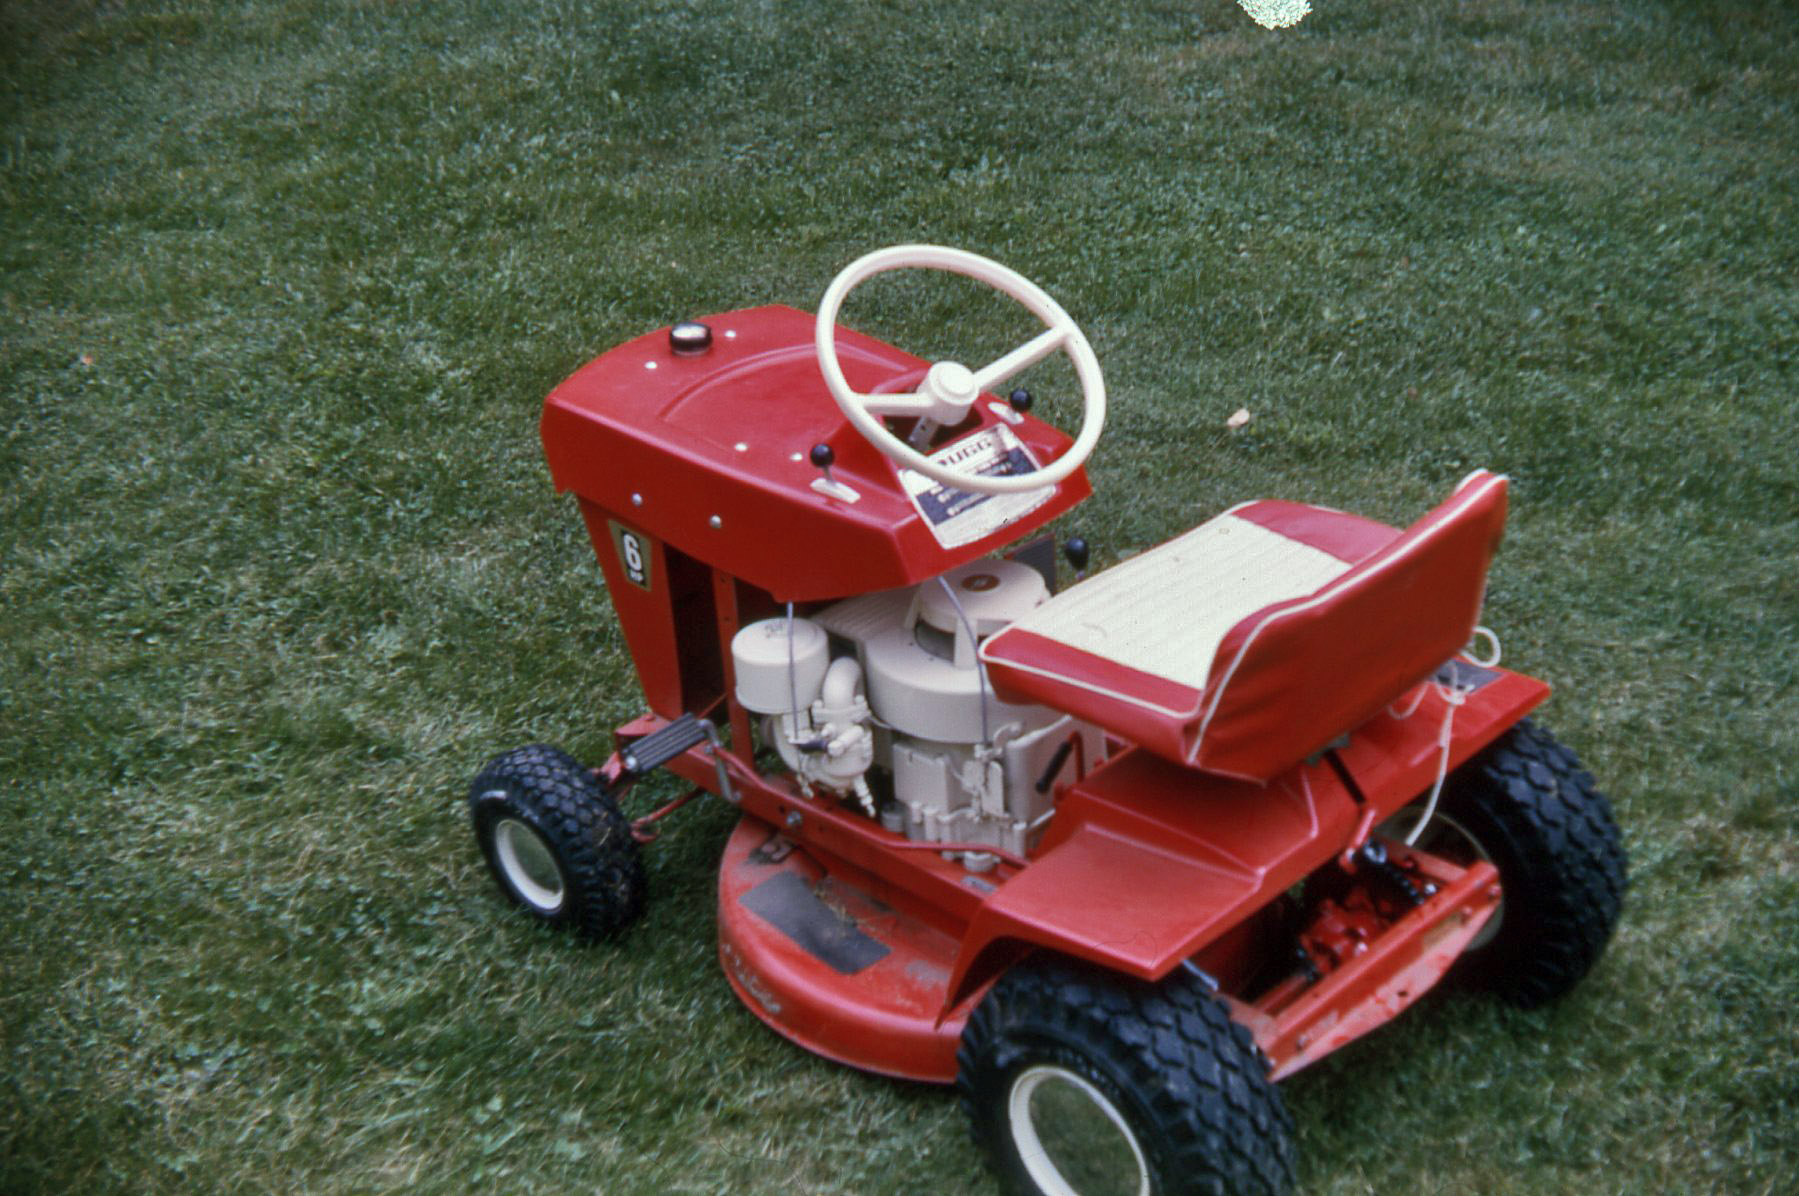 My uncle's new lawn tractor.  1965 Kodachrome.